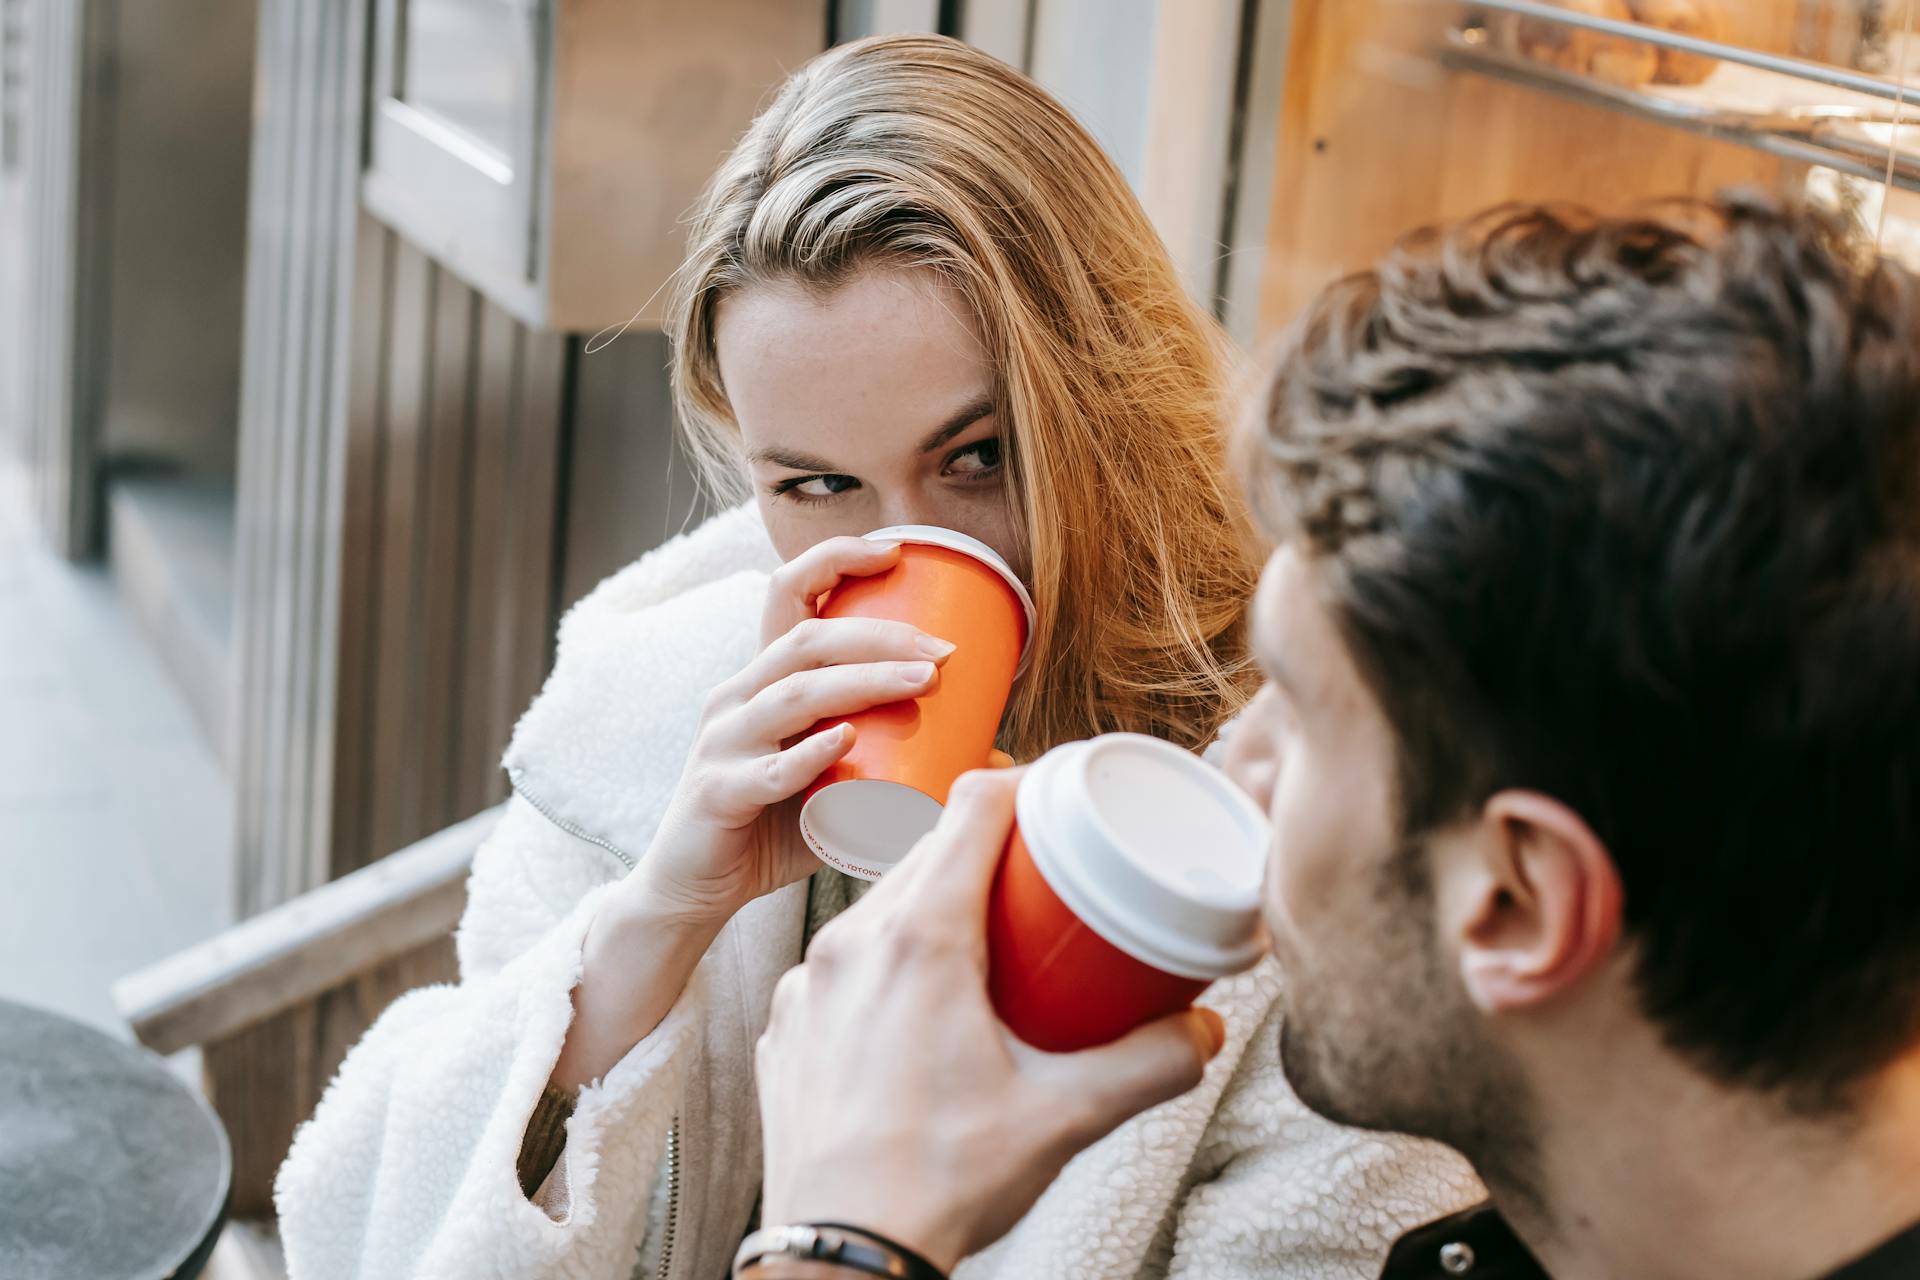 A couple drinking hot beverages and looking at each other in a café | Source: Pexels